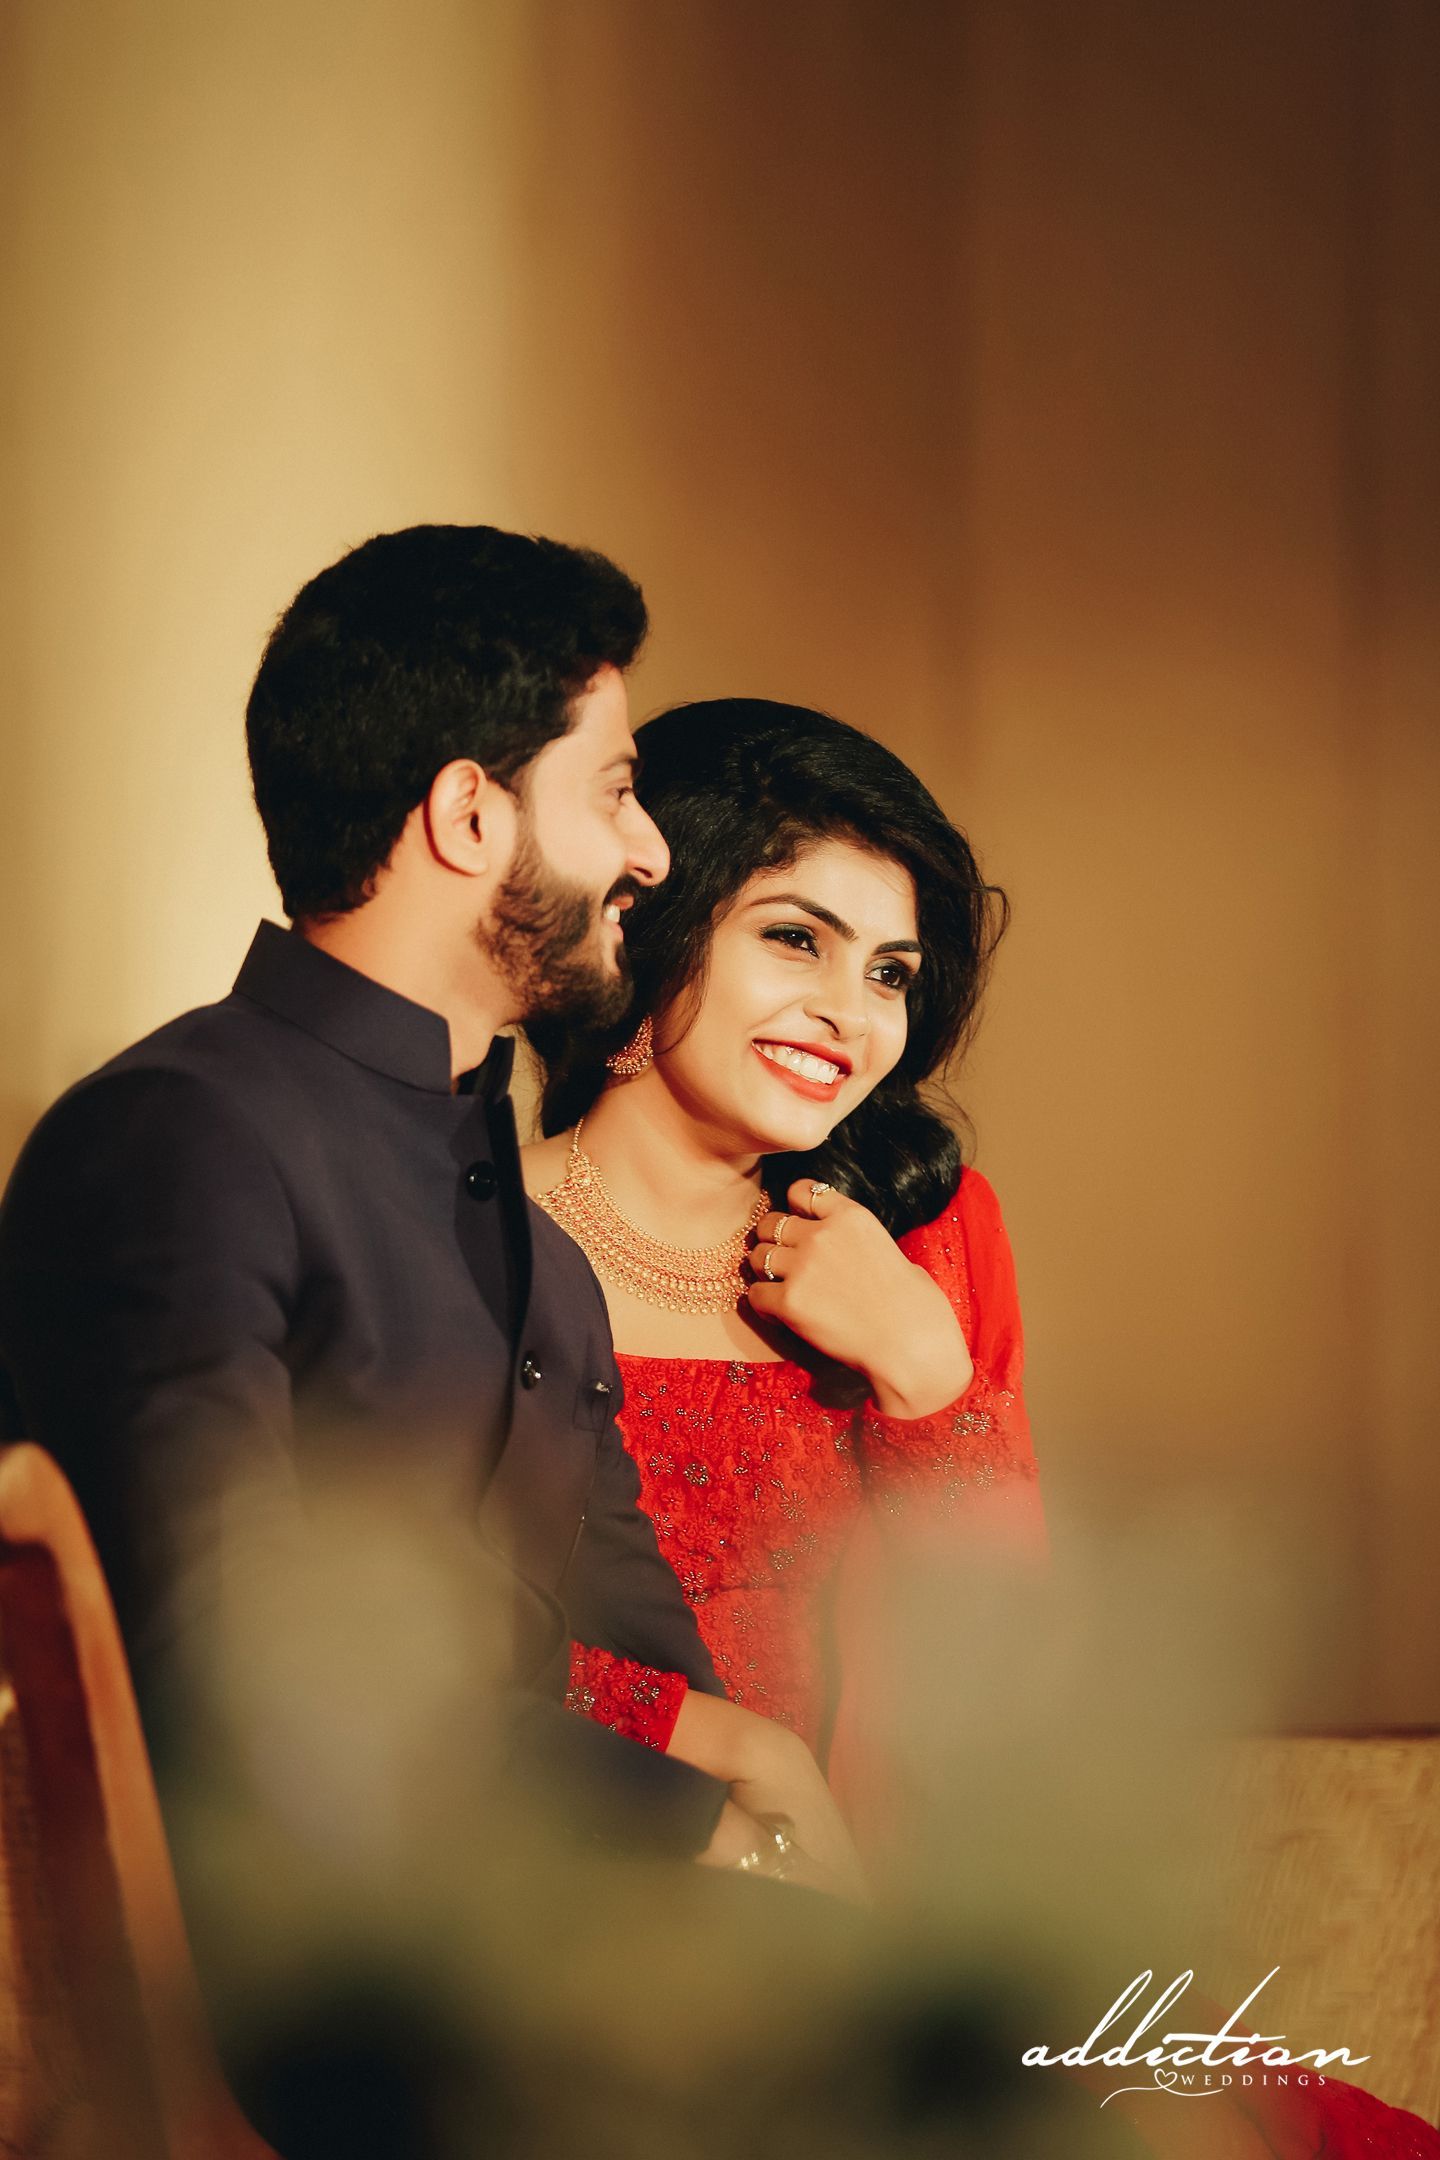 Kerala Love Couple Images Hd Download Pin By Sree On പ്രണയം Bodewasude 2227